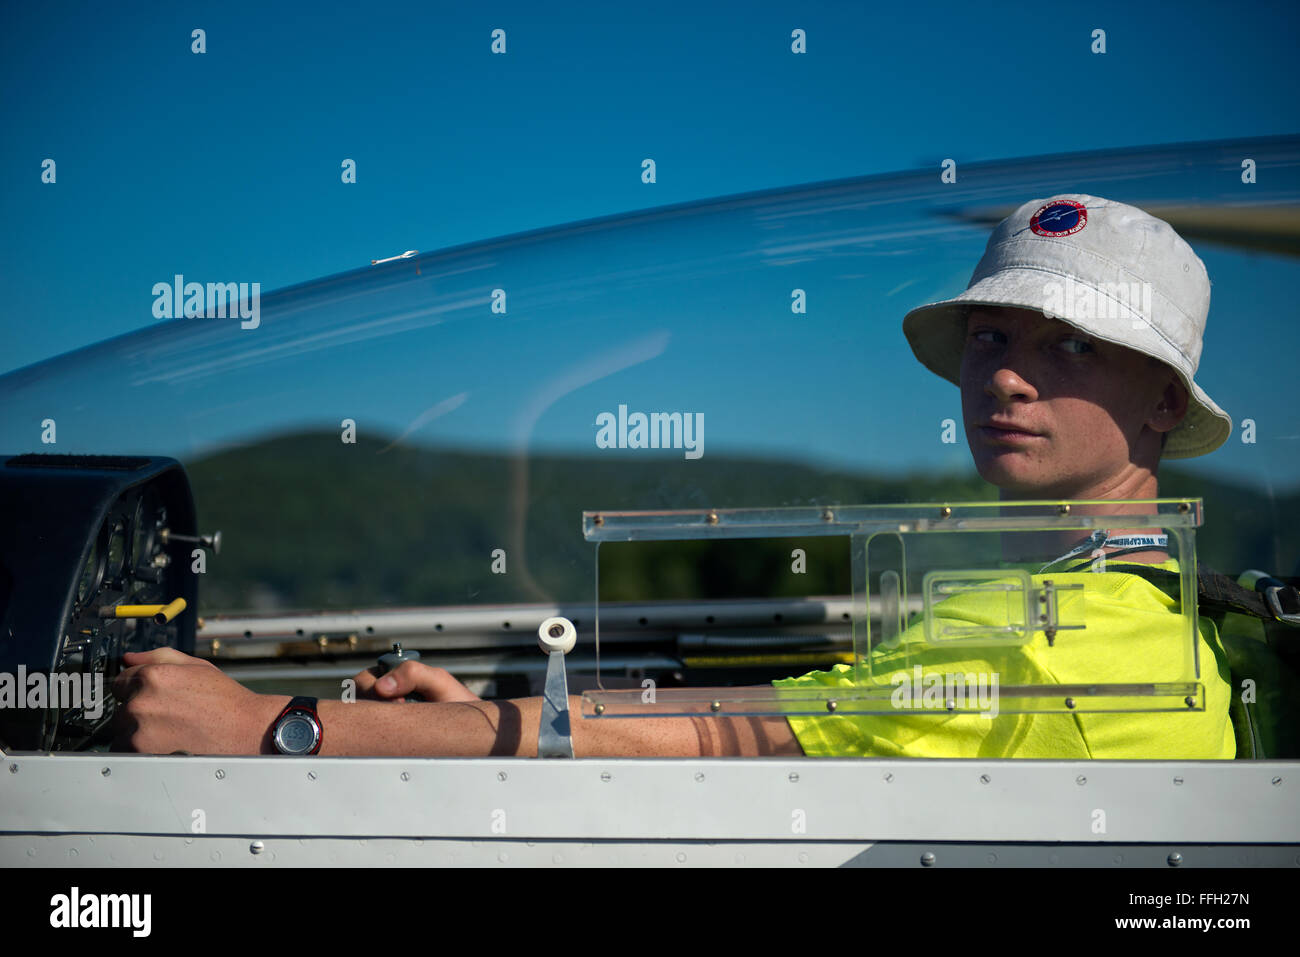 Civil Air Patrol Cadet, Jens Houck, waits for the wing-runner to signal that the air traffic pattern is clear for take-off in Springfield, Vt. Cadets attending the Northeast Region Glider Academy learn the standard hand signals used in glider ground operations. Stock Photo